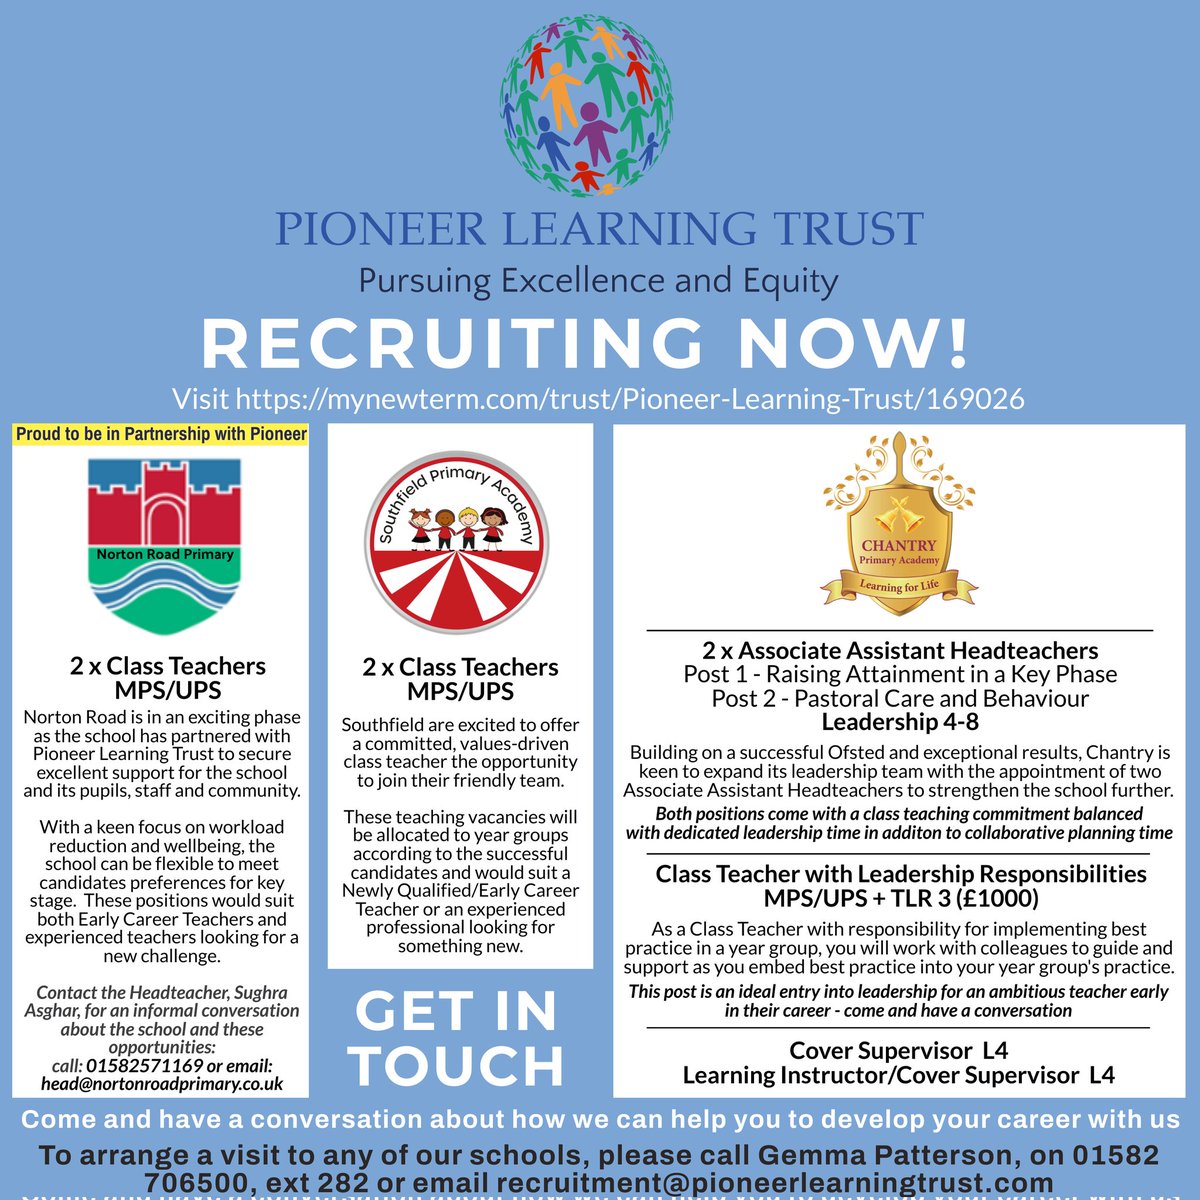 👁️👁️ Check out this great range of posts to suit you, whatever your career stage: ✅ ECTs looking for a first job ✅ Experienced class teachers ✅ Teachers looking for their first leadership post ✅ Aspiring leaders seeking a strategic role APPLY NOW at mynewterm.com/trust/Pioneer-…